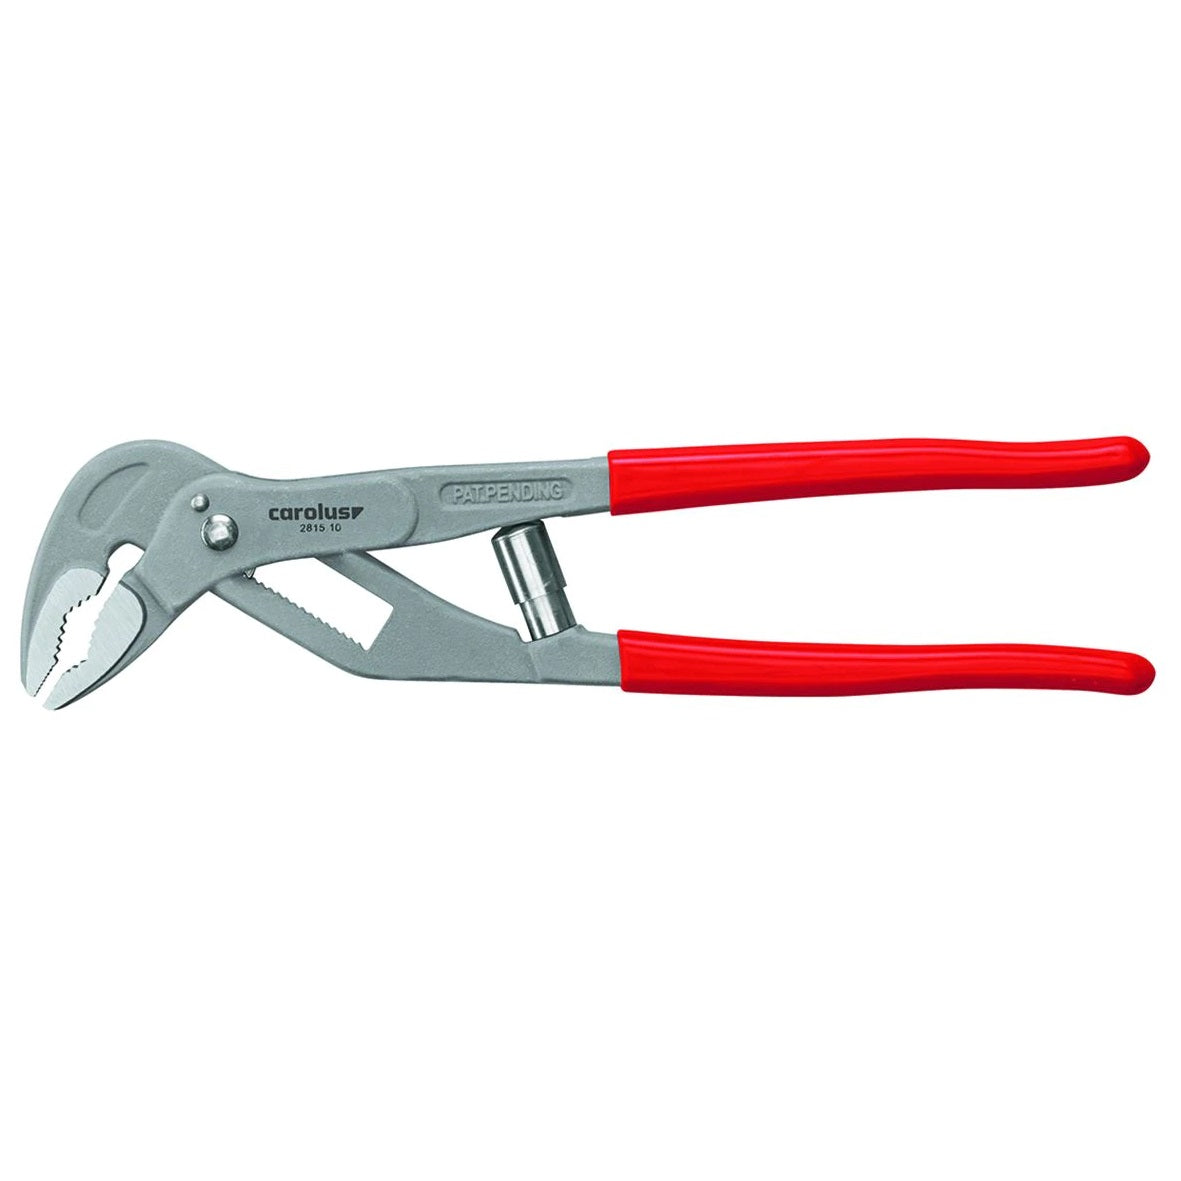 Gedore Carolus 2247909 Water Pump Pliers 10" with Automatic Single-Hand Adjustment